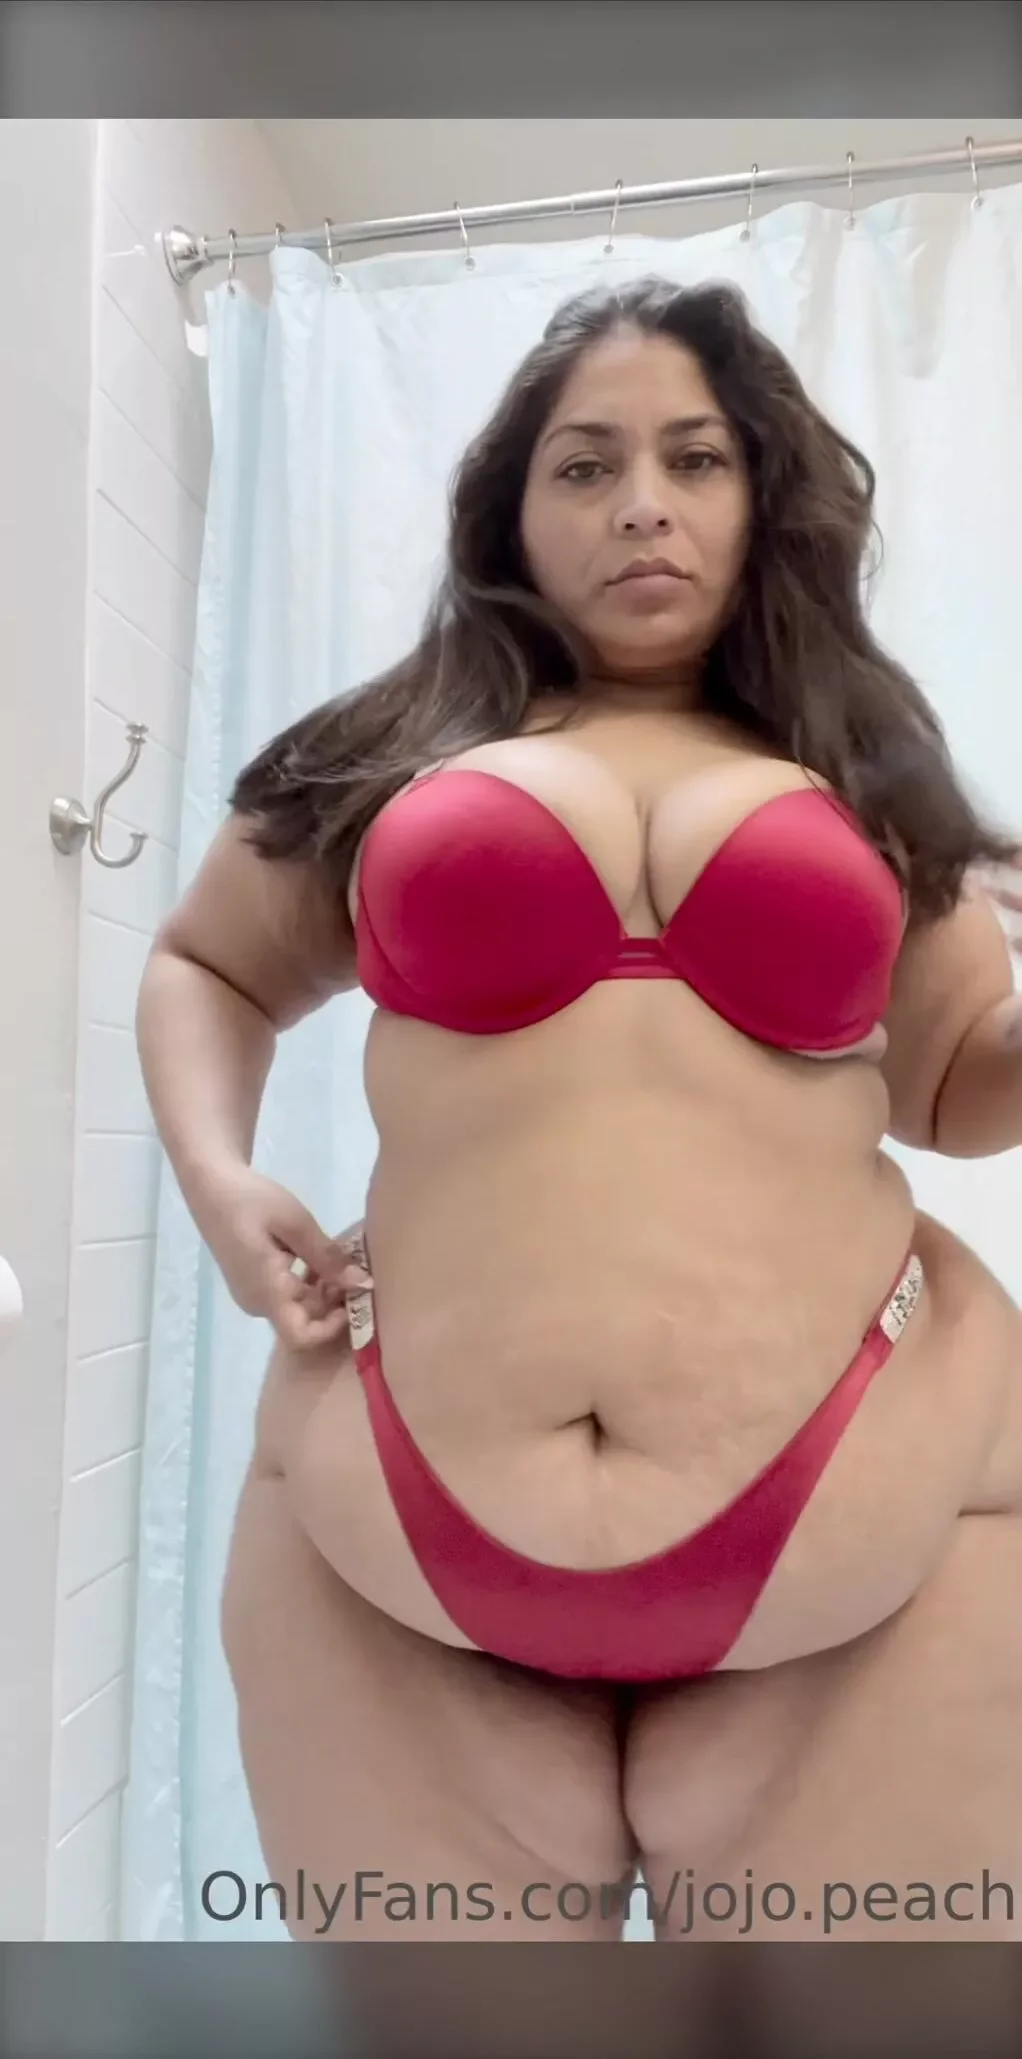 Watch Jojo.peach Mexican BBW Teasing With Big Tits OnlyFans Video image